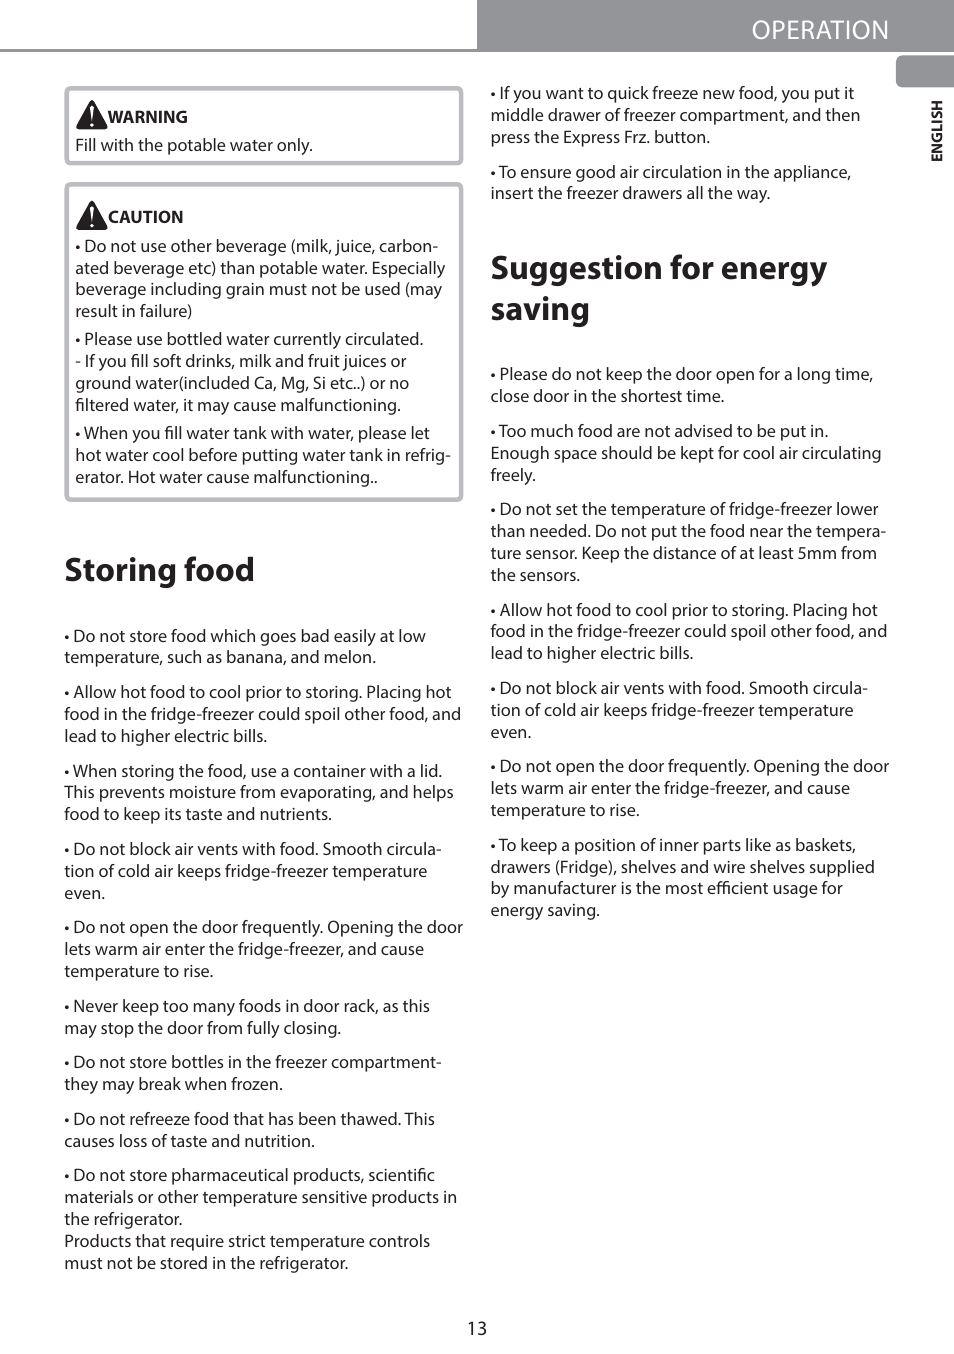 Storing food, Suggestion for energy saving, Operation | LG GW-B489SMFZ User Manual | Page 13 / 21